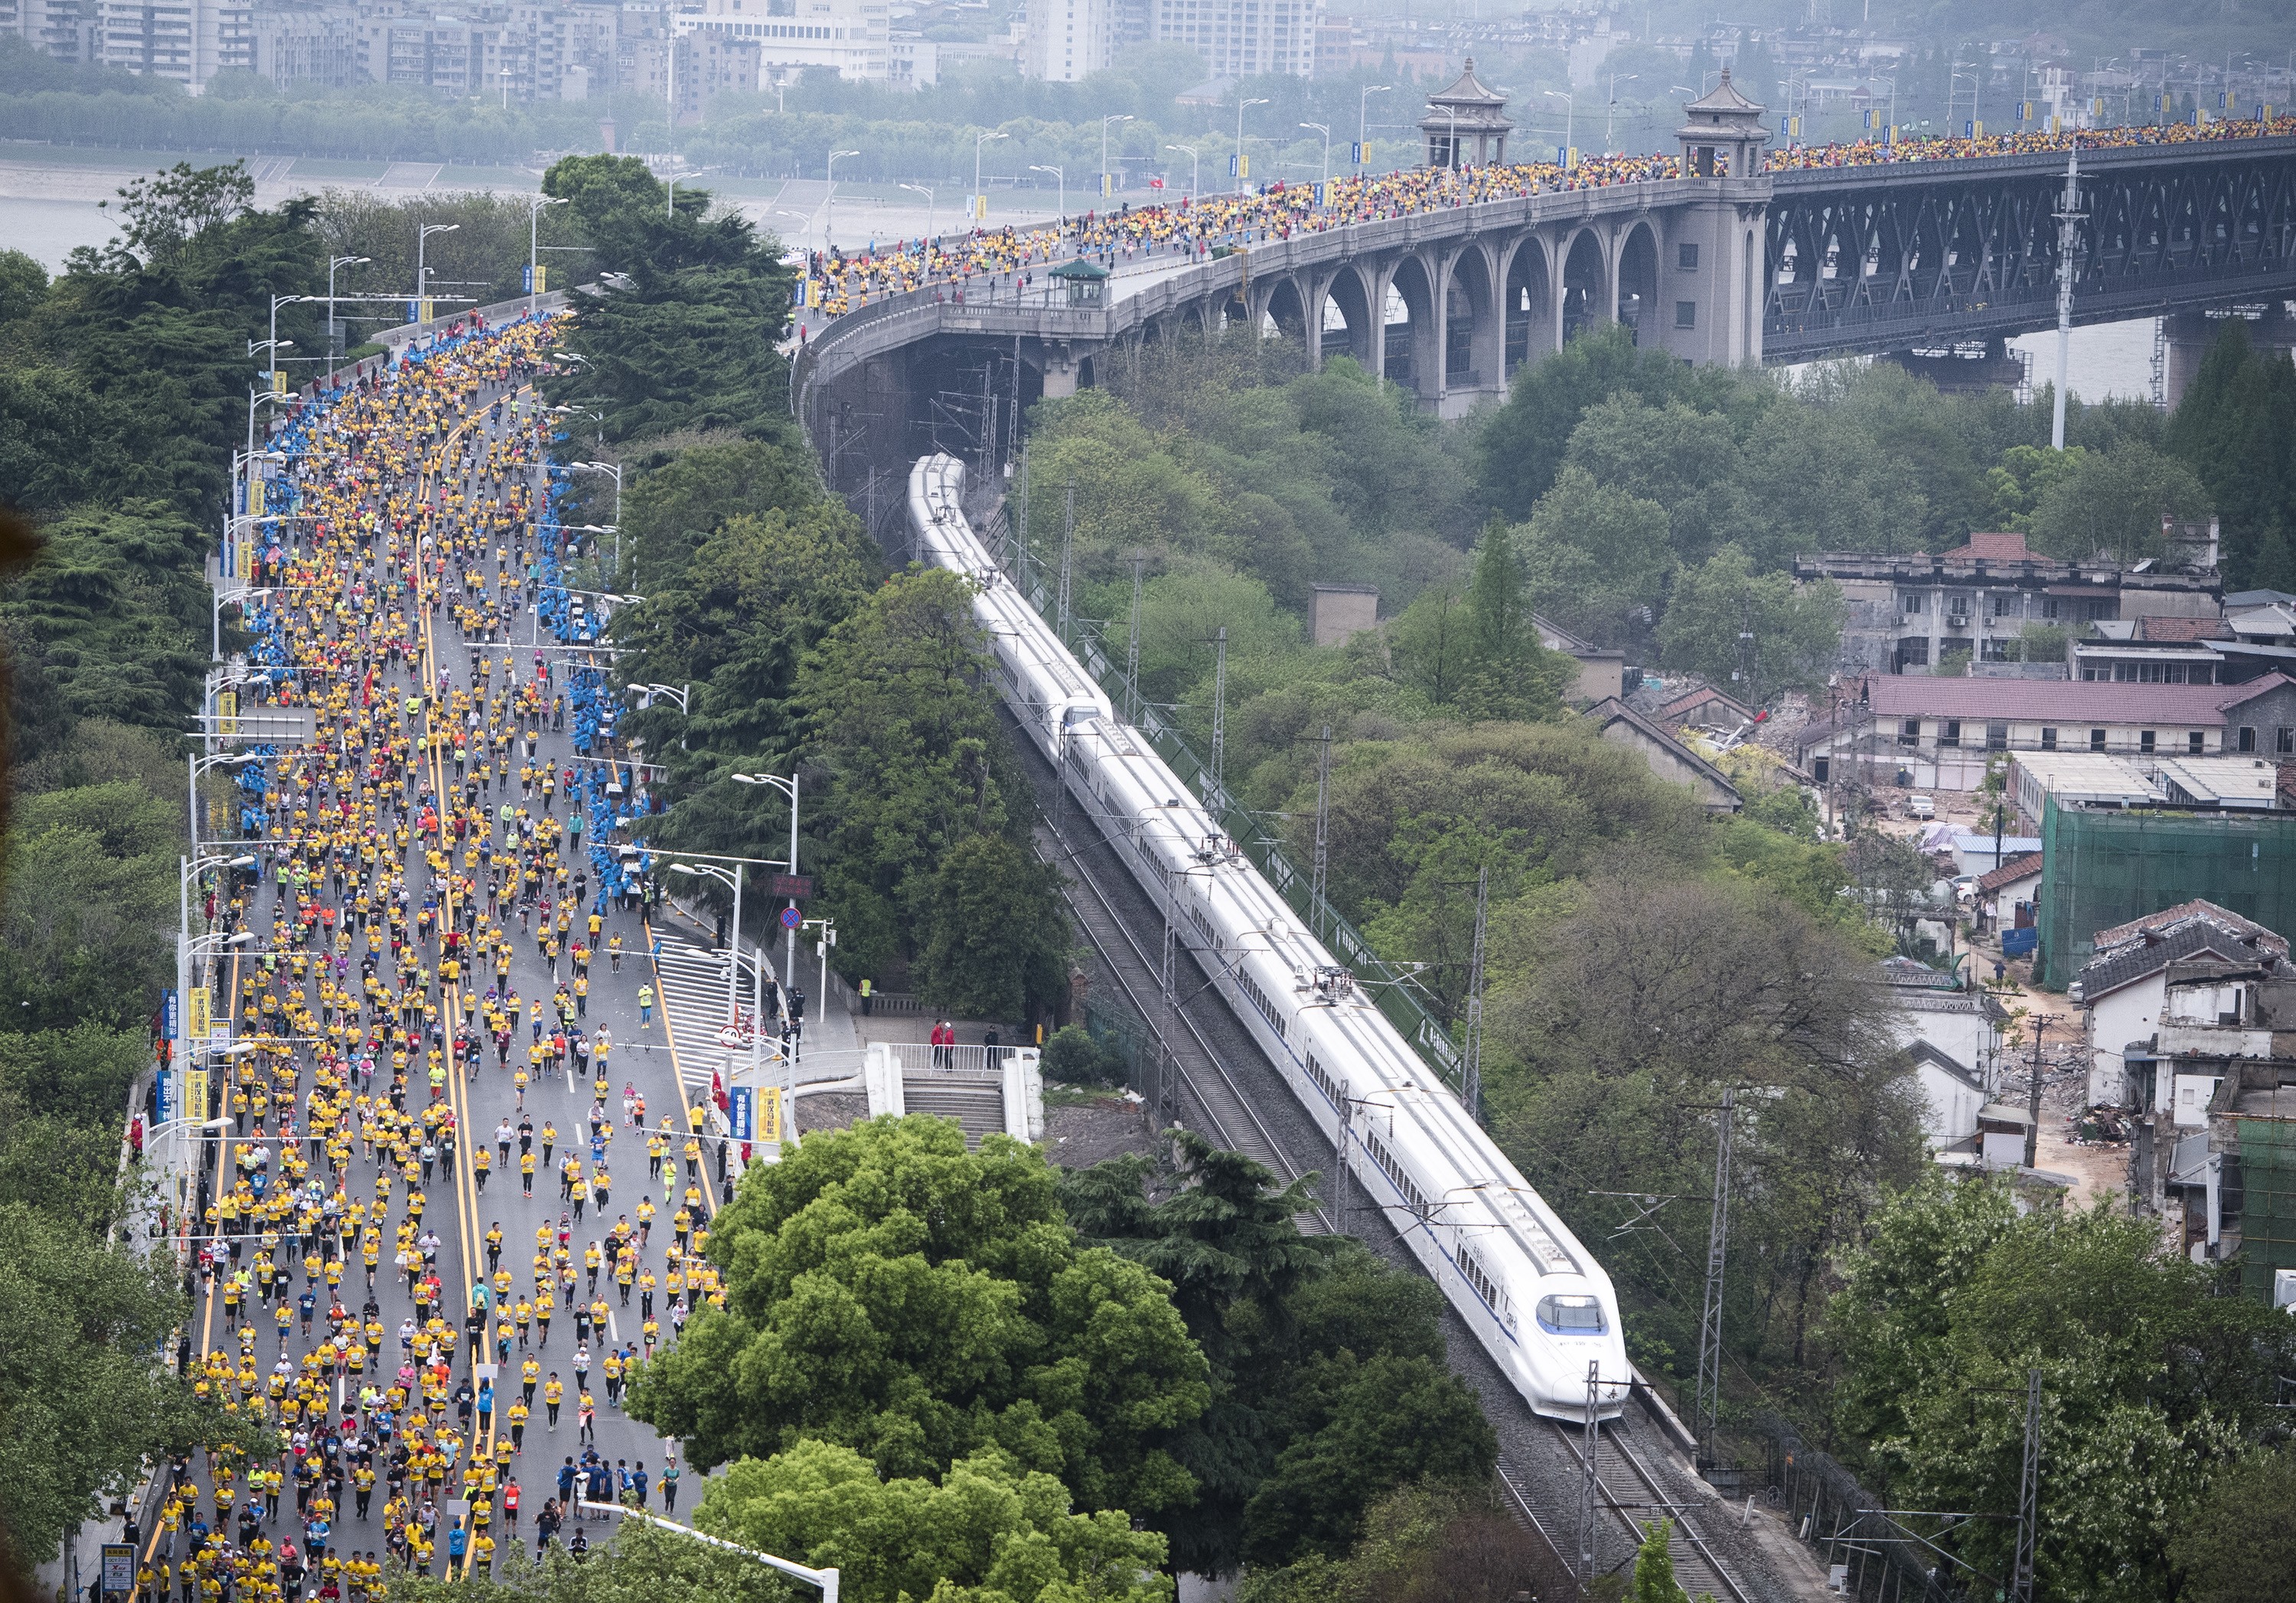 Runners cross the Wuhan Yangtze River Bridge during the 2019 Wuhan Marathon in Hubei province, China. About 24,000 participants took part. Photo: Xinhua